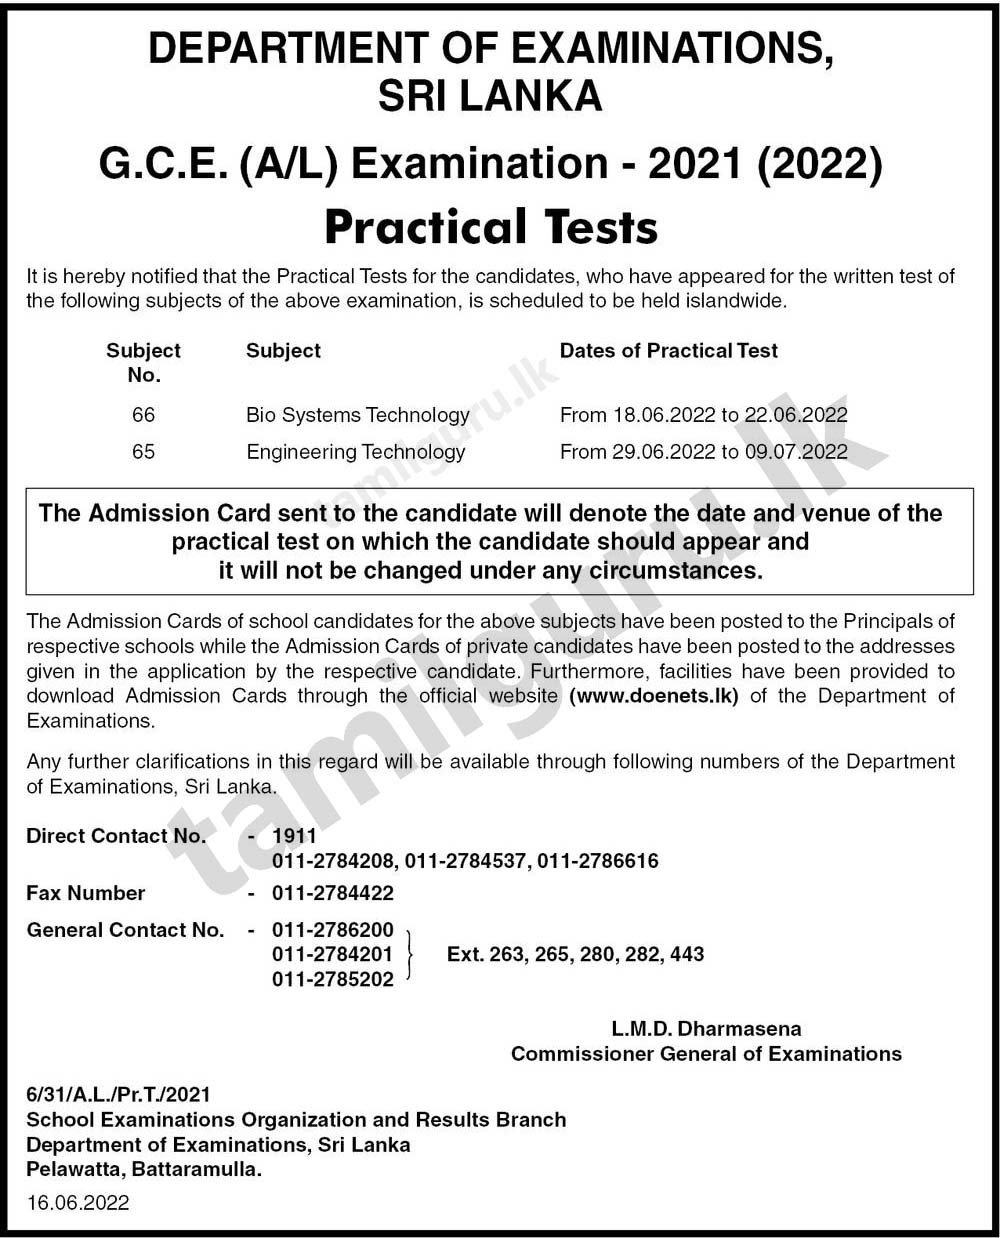 Practical Tests (Technology Stream) - G.C.E. A/L Examination 2021 (2022) (Details in English)